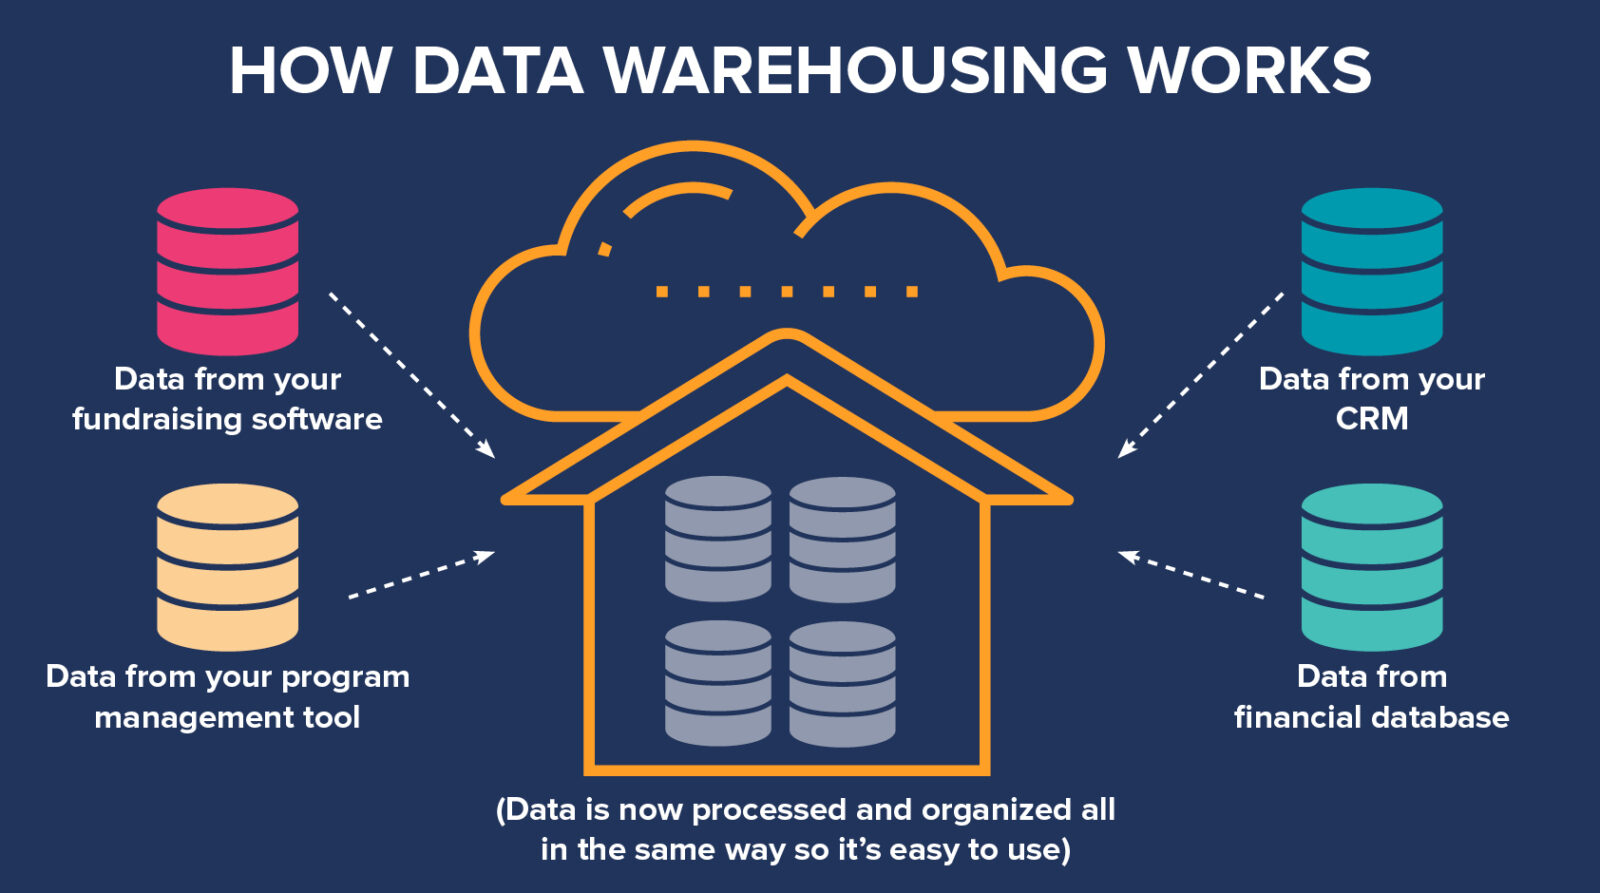 Image that shows how data warehousing works, which is explained in the text below